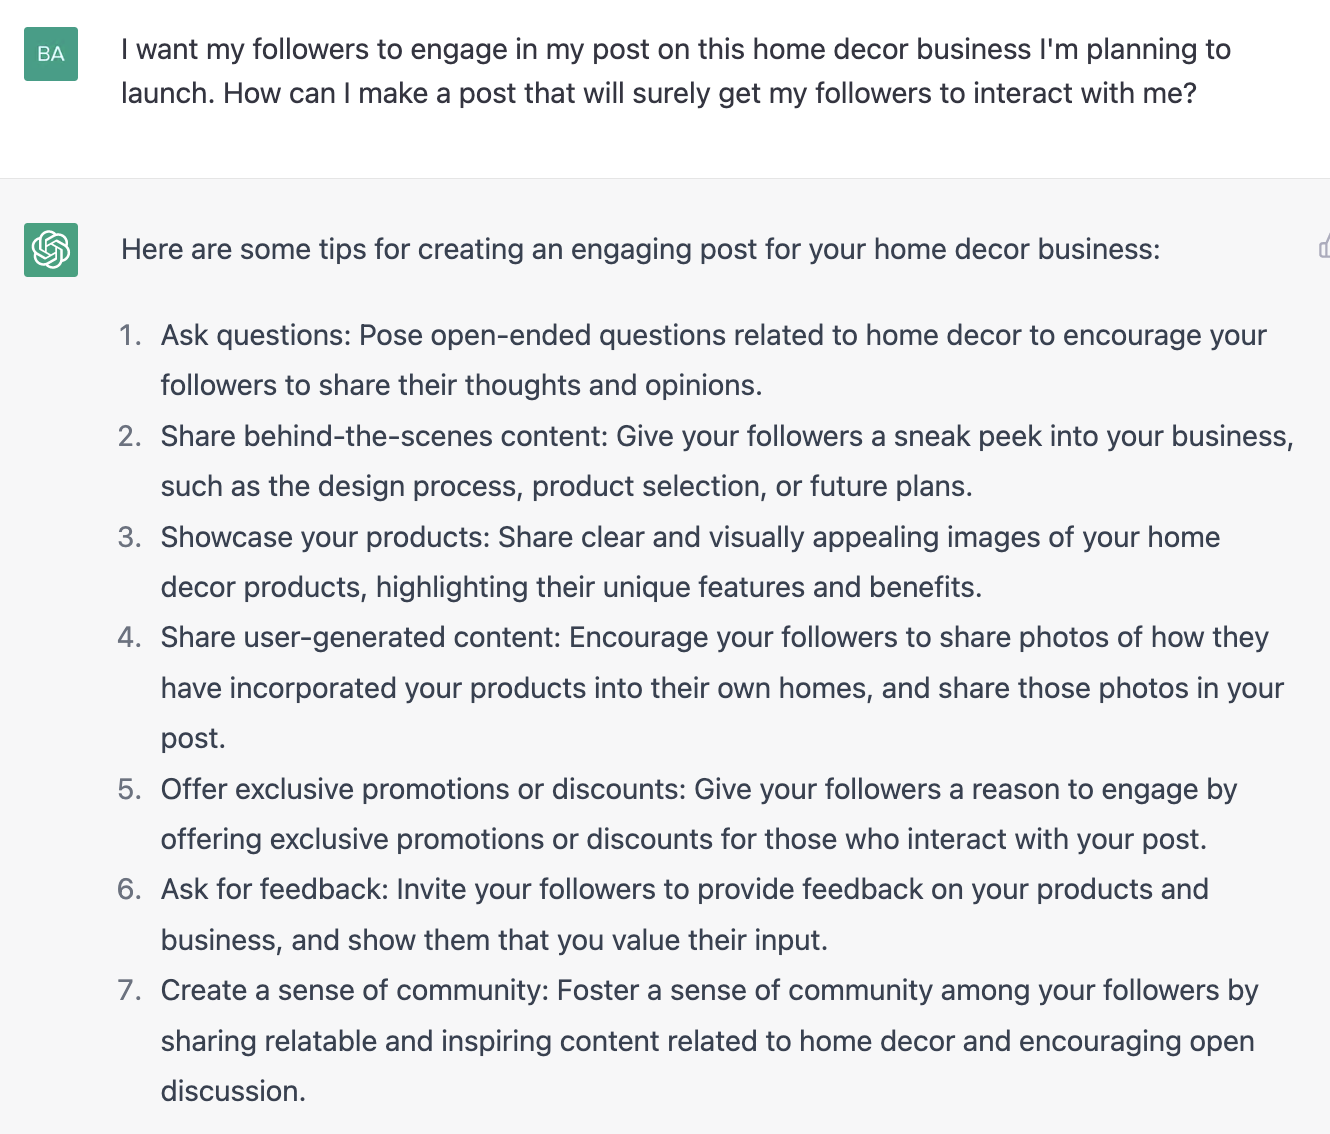 ChatGPT prompt about tips for creating an engaging post for your home decor business